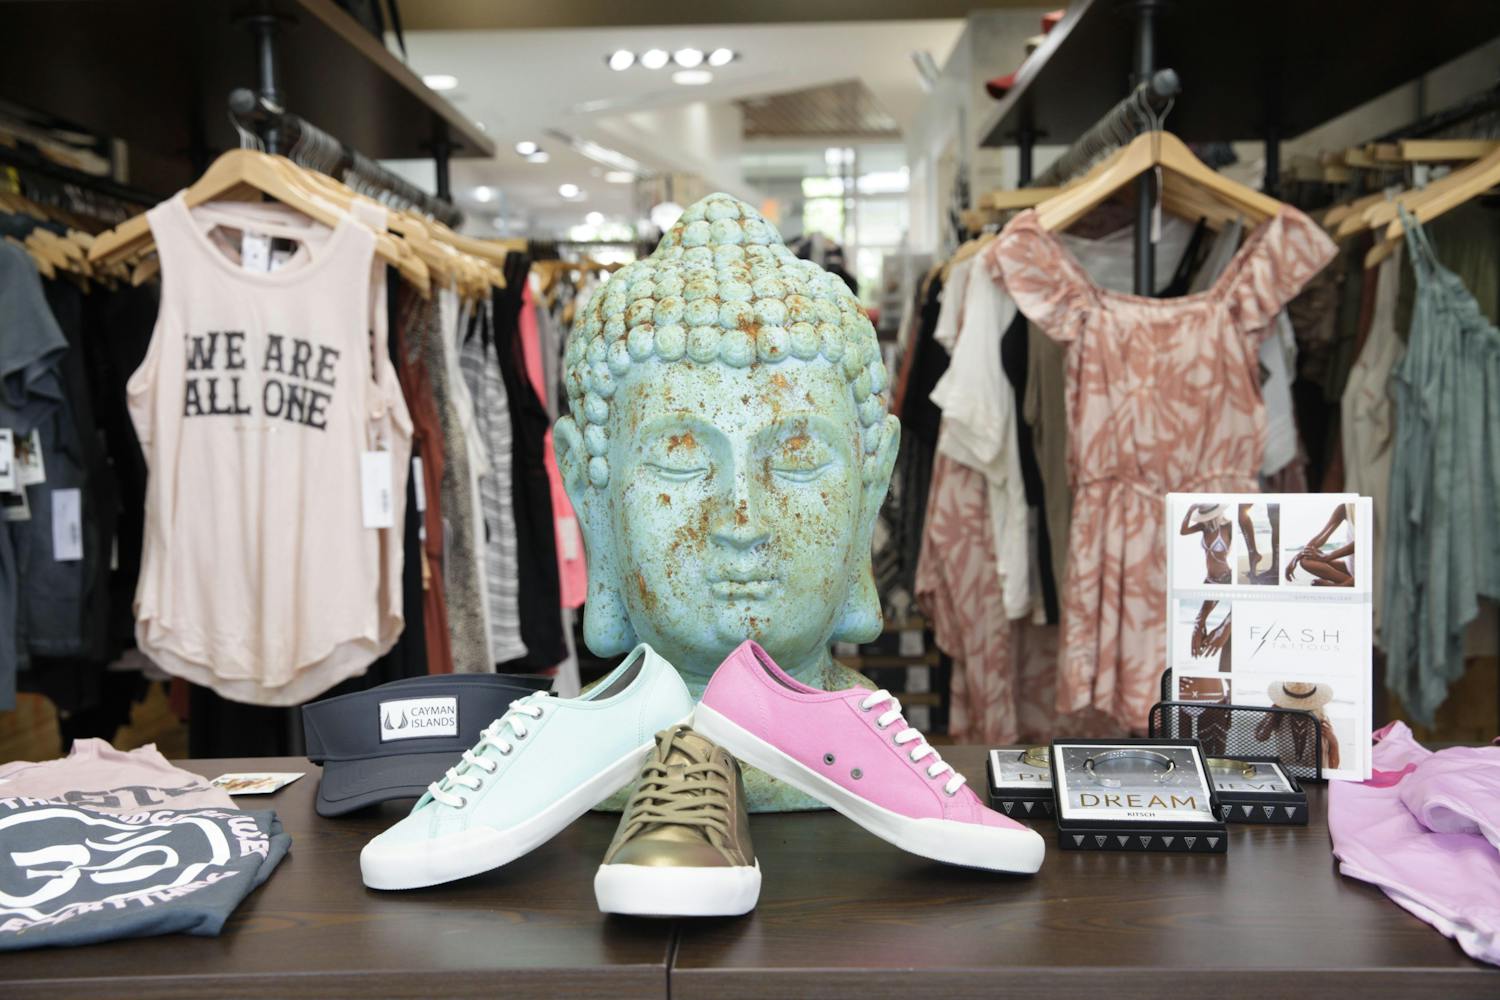 https://acorn-media.imgix.net/images/front-window-display-of-shoes-and-tanks-with-an-ornamental-buddah-head-in-the-centre.jpg?auto=compress%2Cformat&crop=focalpoint&domain=acorn-media.imgix.net&fit=crop&fp-x=0.5&fp-y=0.5&h=1000&ixlib=php-3.3.0&w=1500